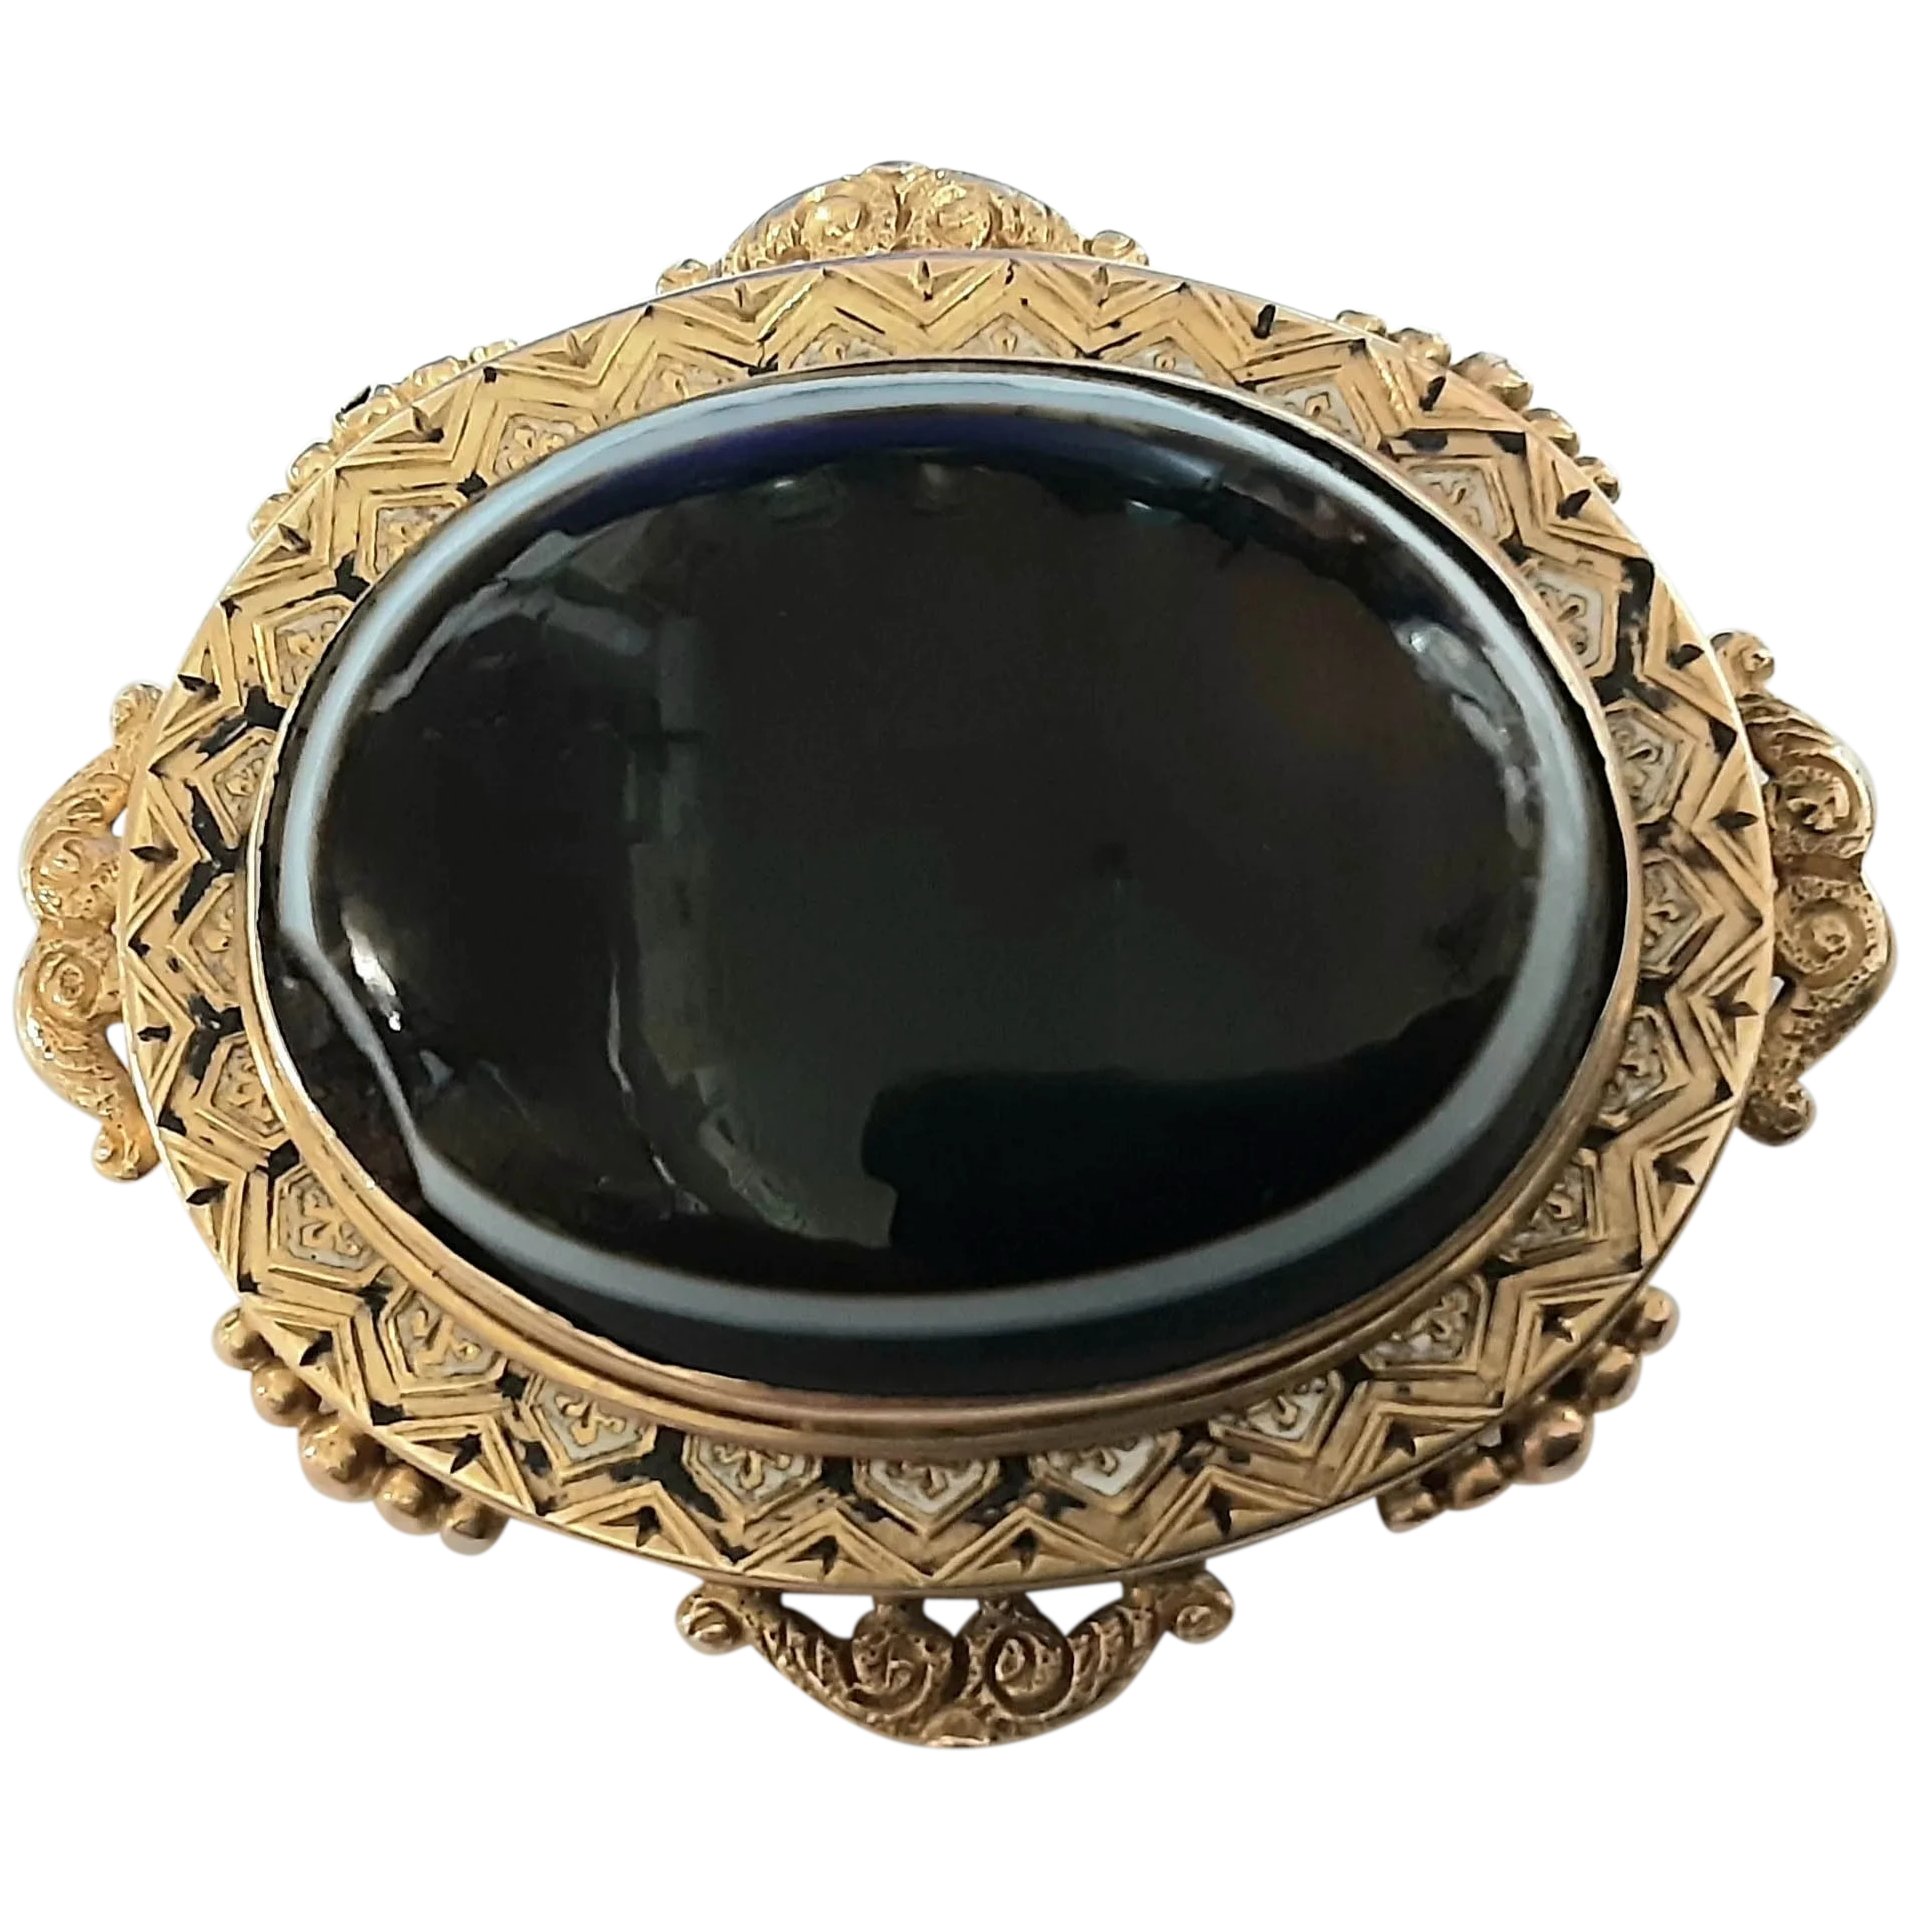 Victorian 18 Carat Gold & Striped Onyx Mourning Brooch